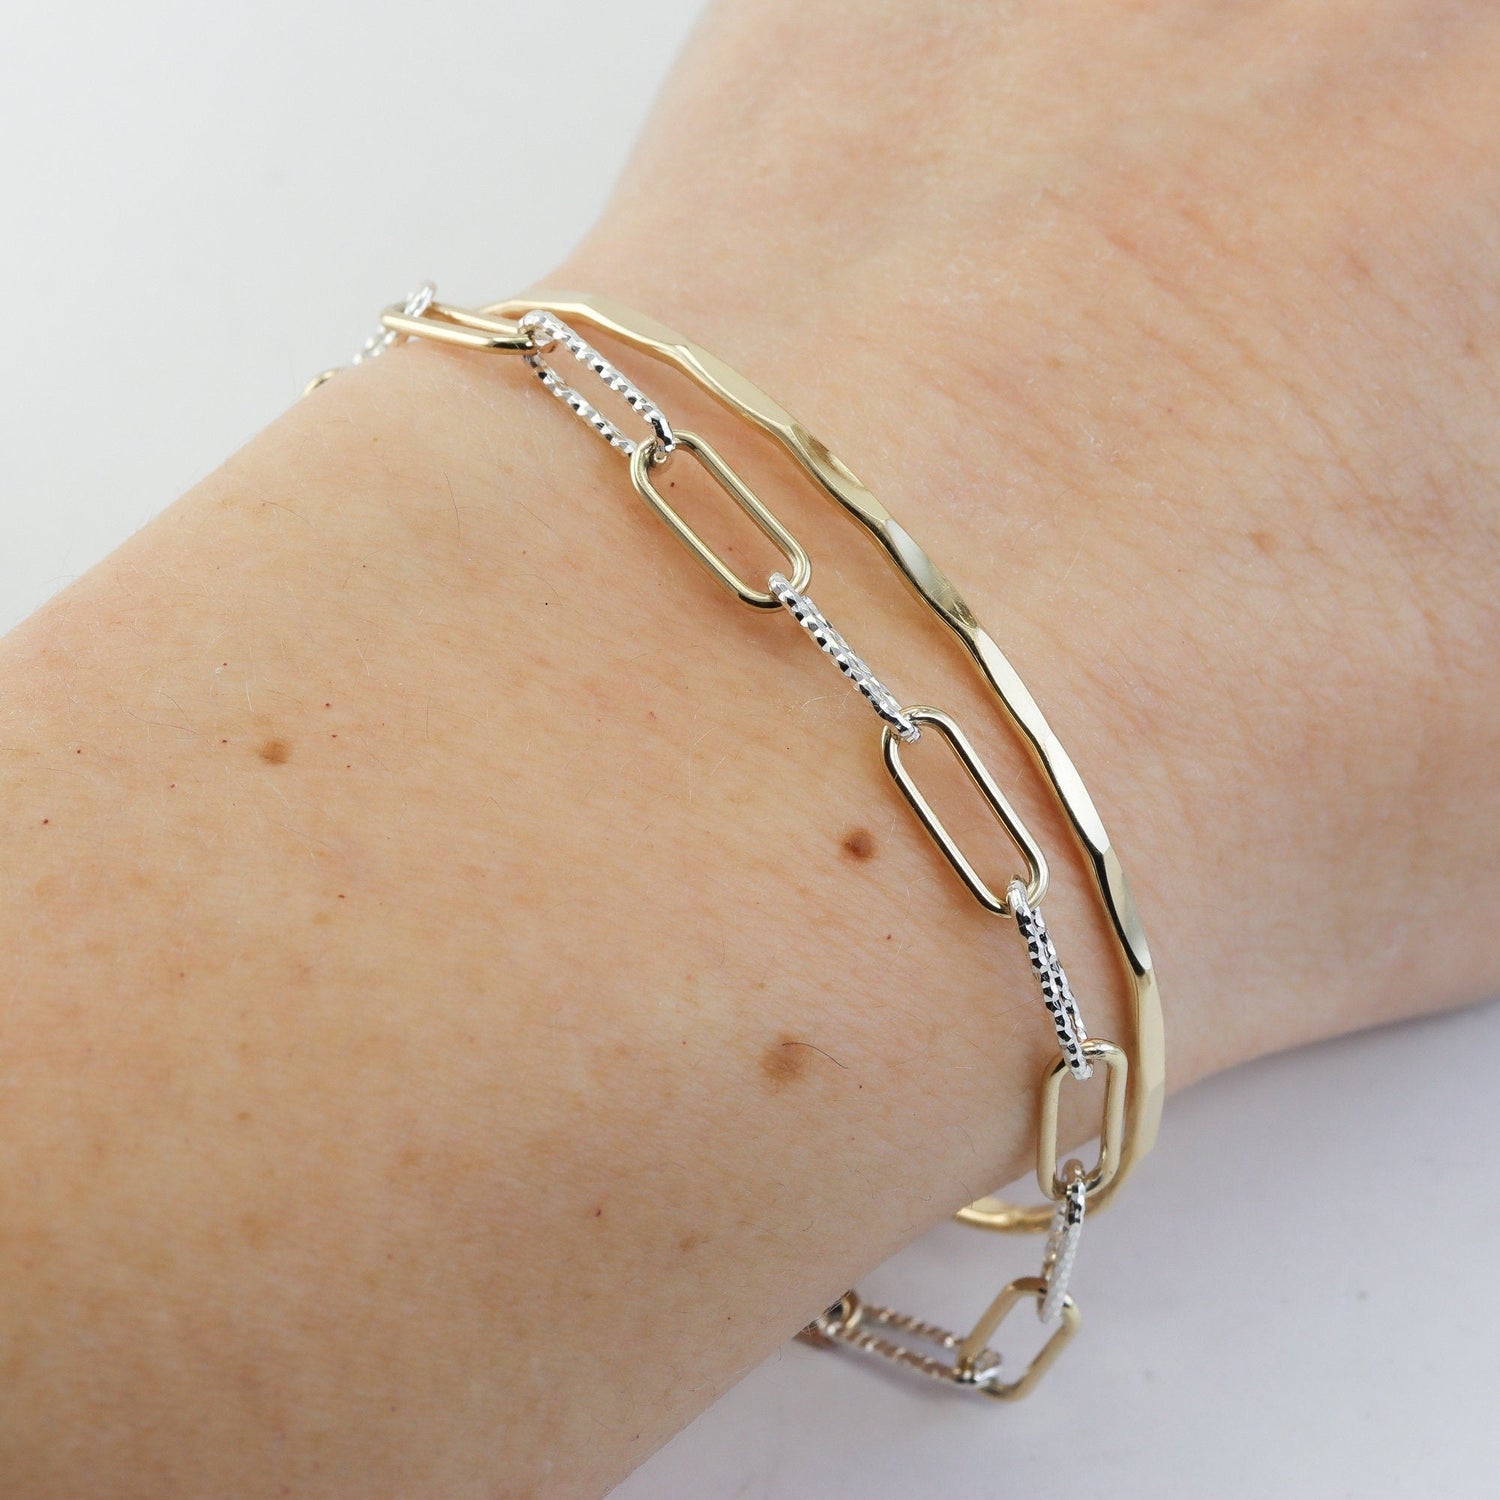 Chunky Paperclip Chain Bracelet in Gold and Silver - Mixed Metals Char –  Lotus Stone Design